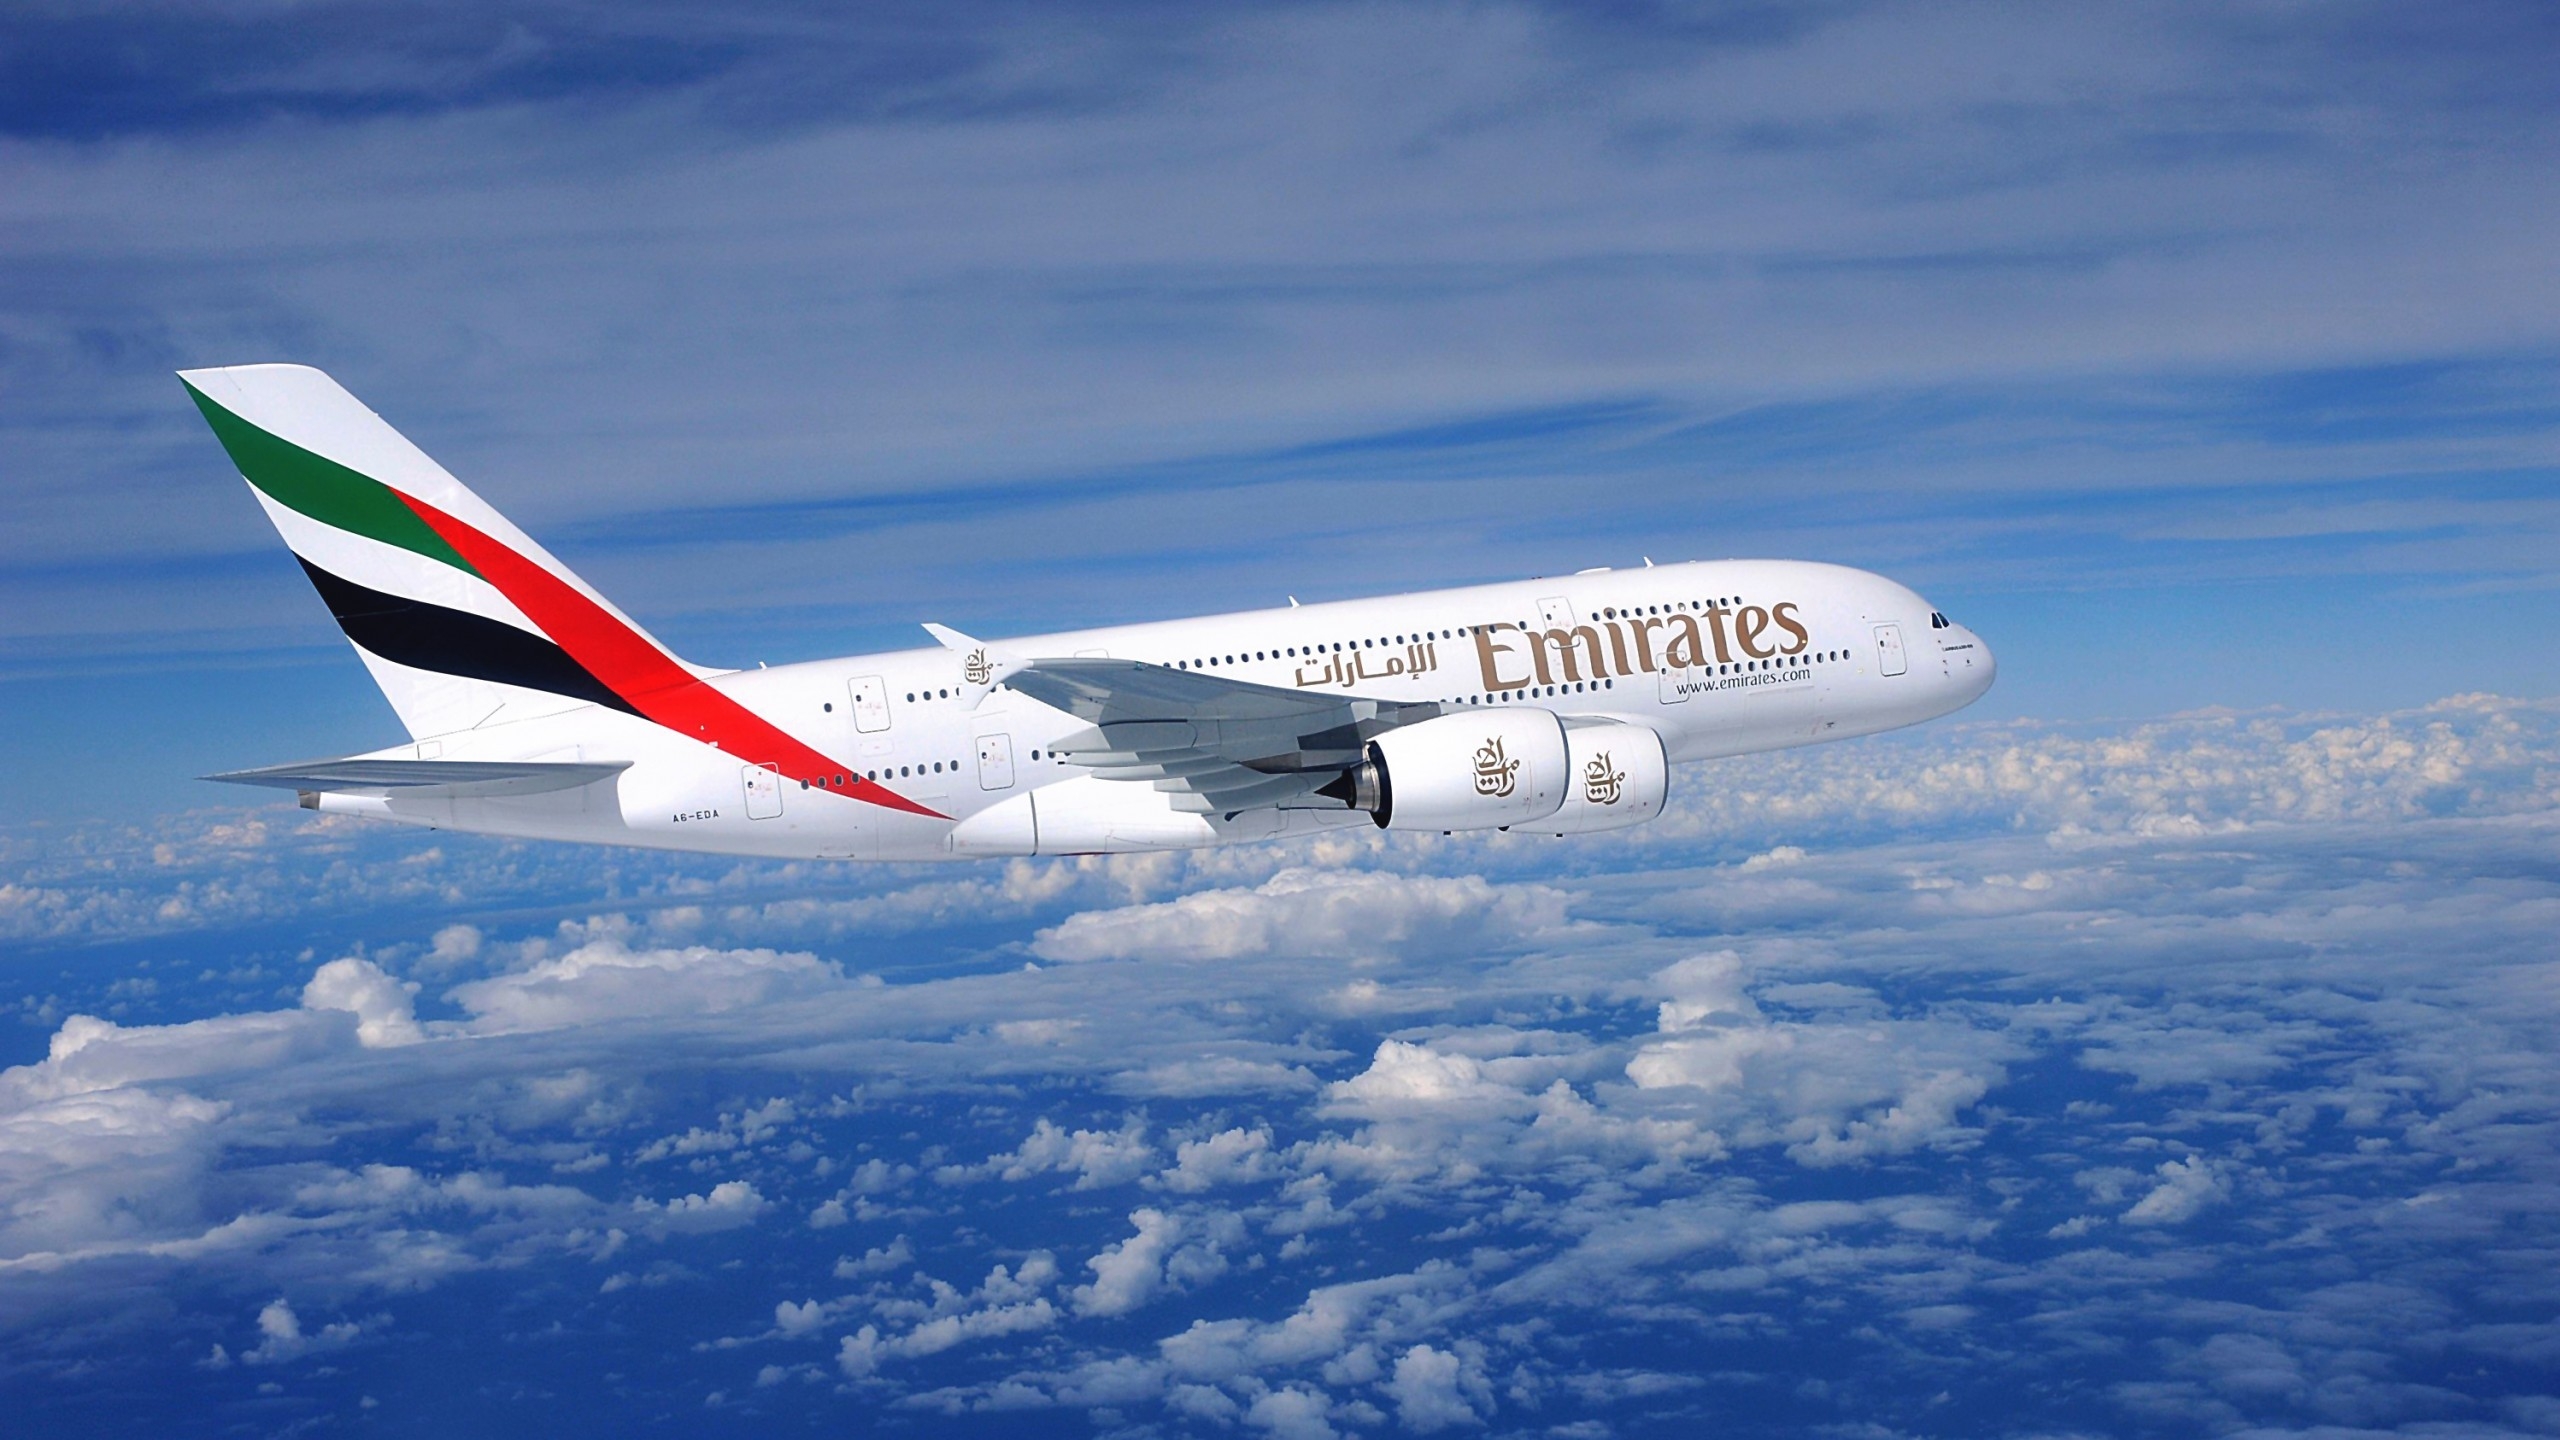 Emirates Airline for 2560x1440 HDTV resolution